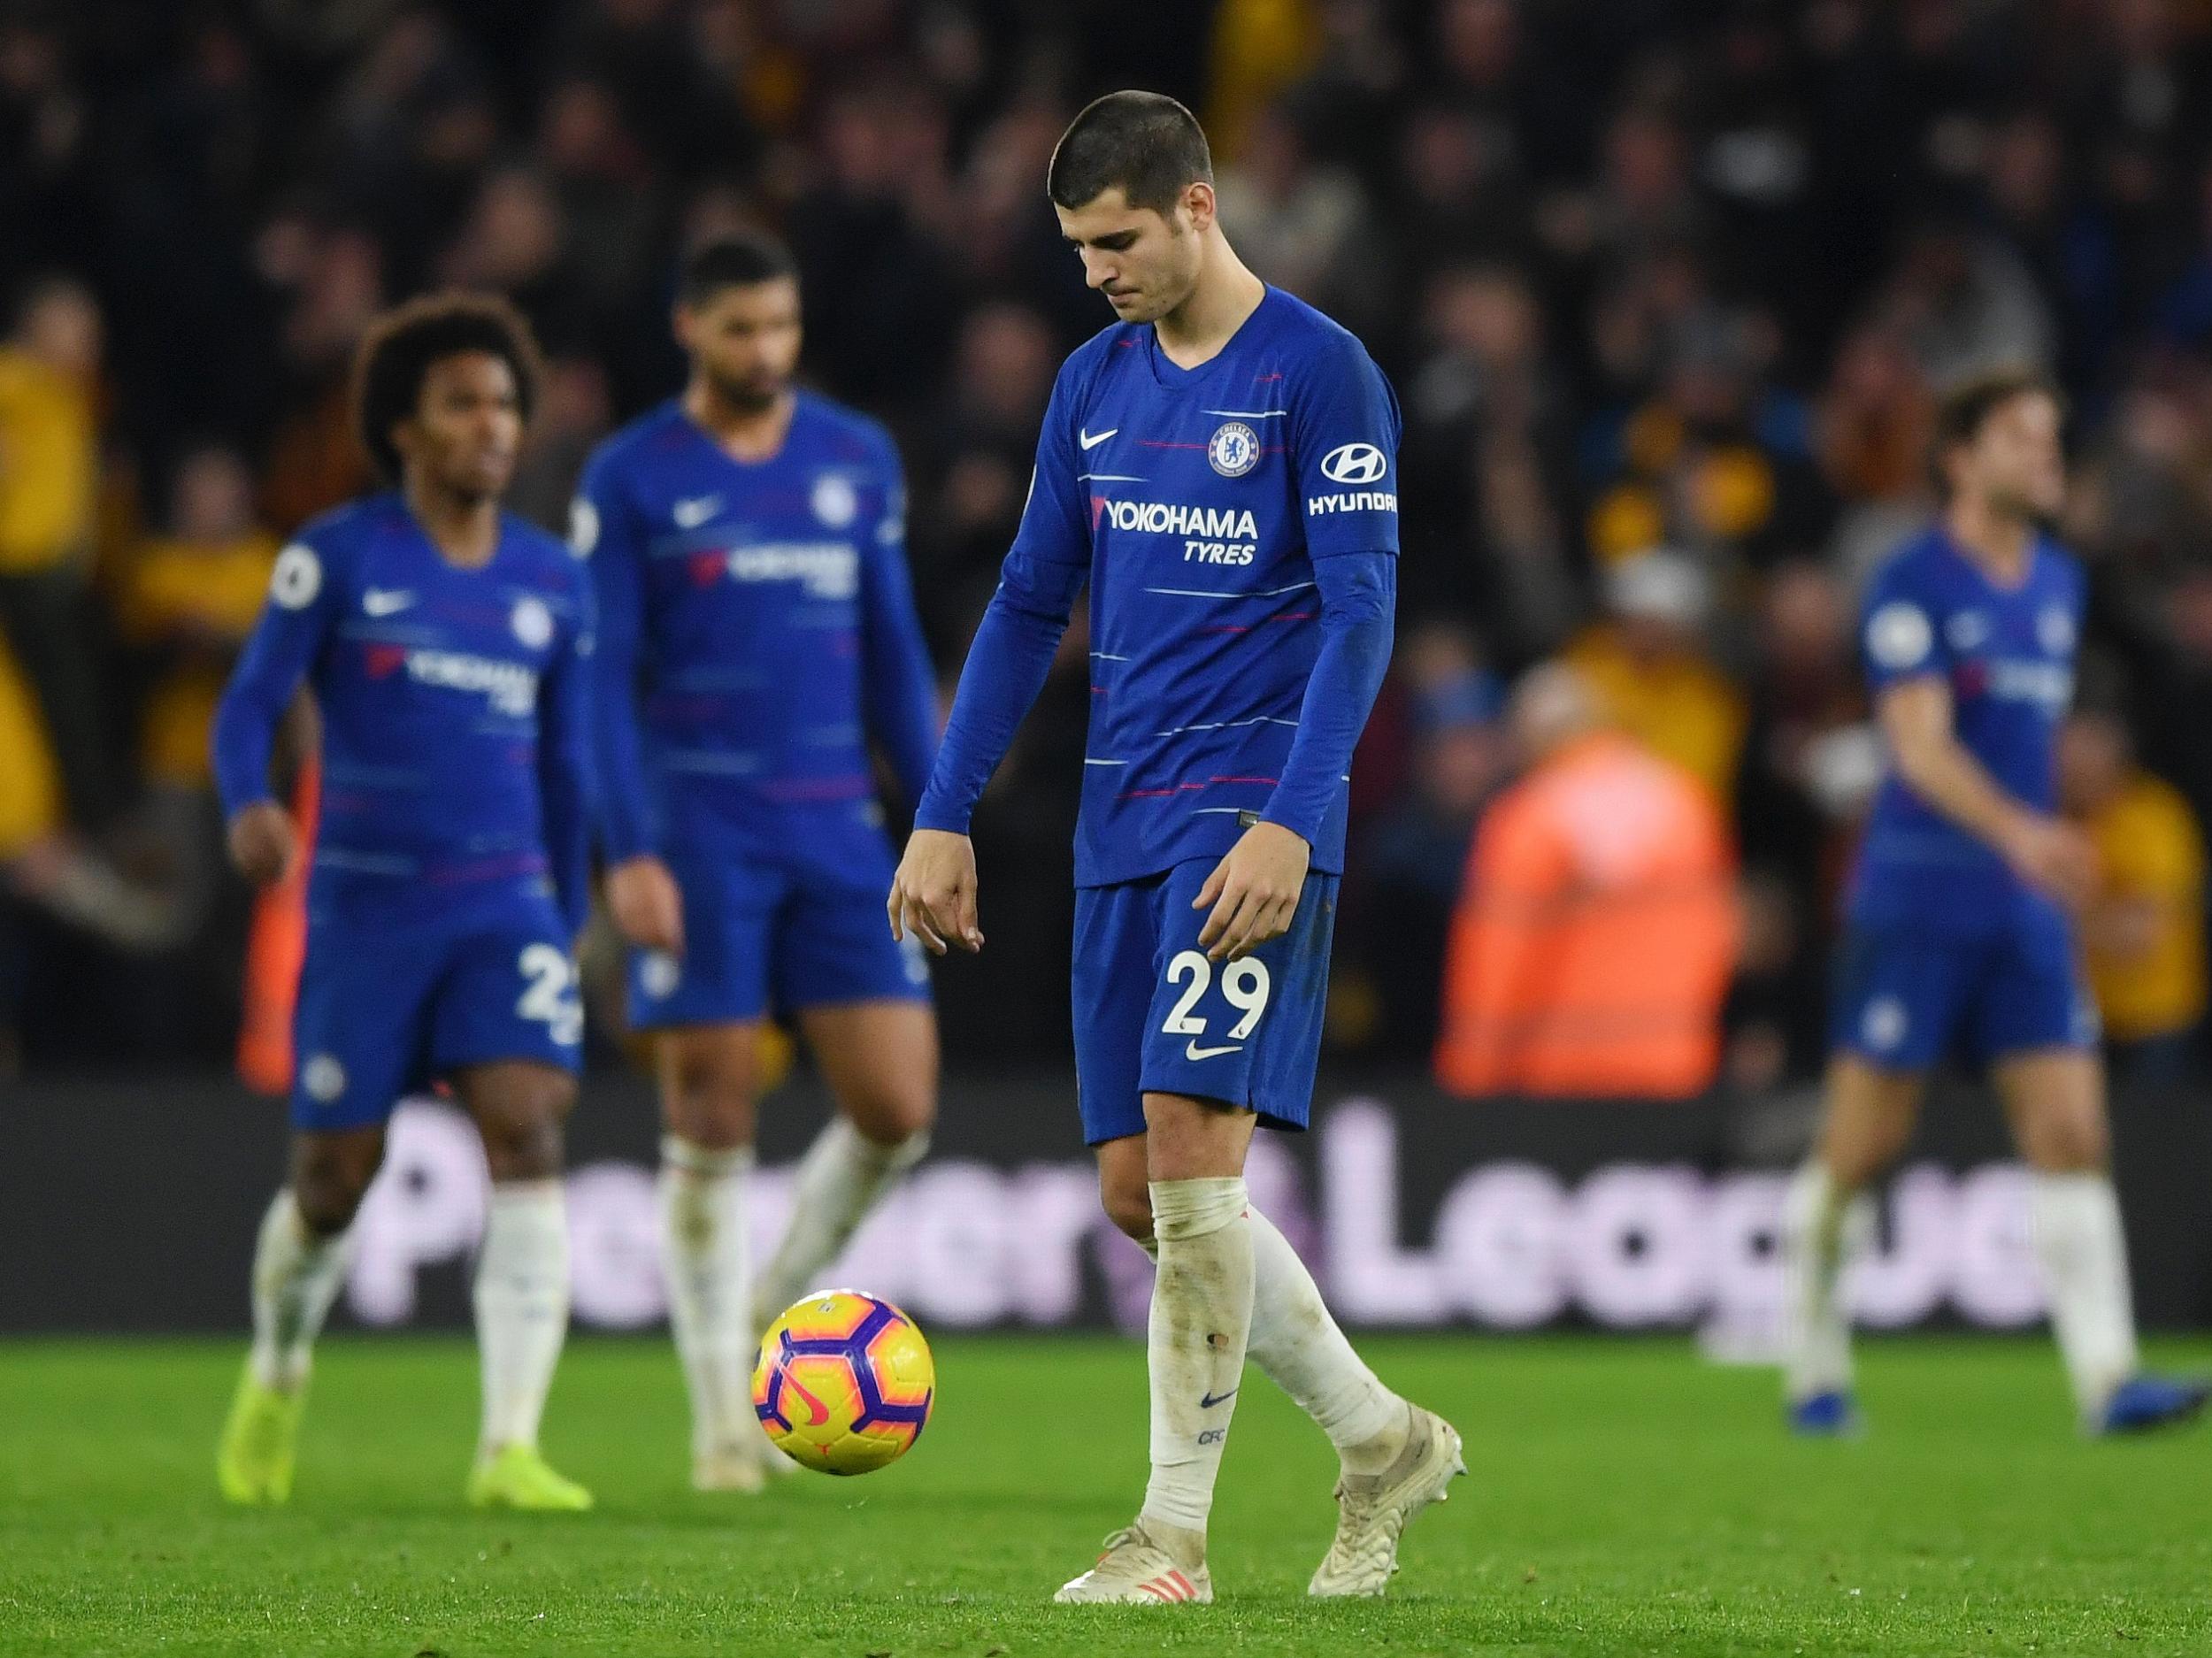 Defeat by Wolves left Sarri questioning his side